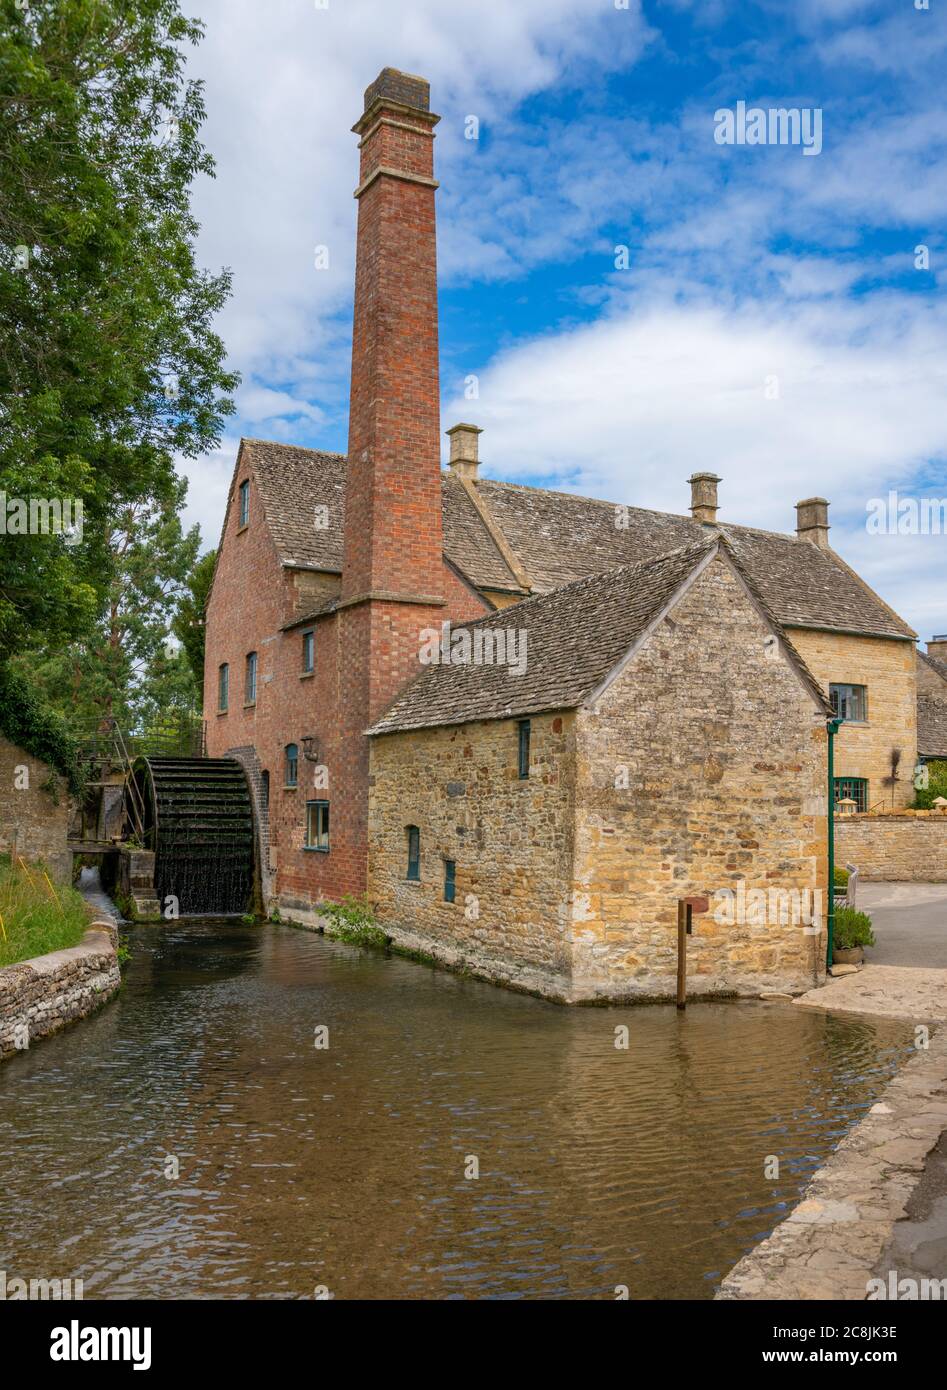 The Old Mill on the River Eye in Lower Slaughter, The Cotswolds, Gloucestershire, Regno Unito Foto Stock